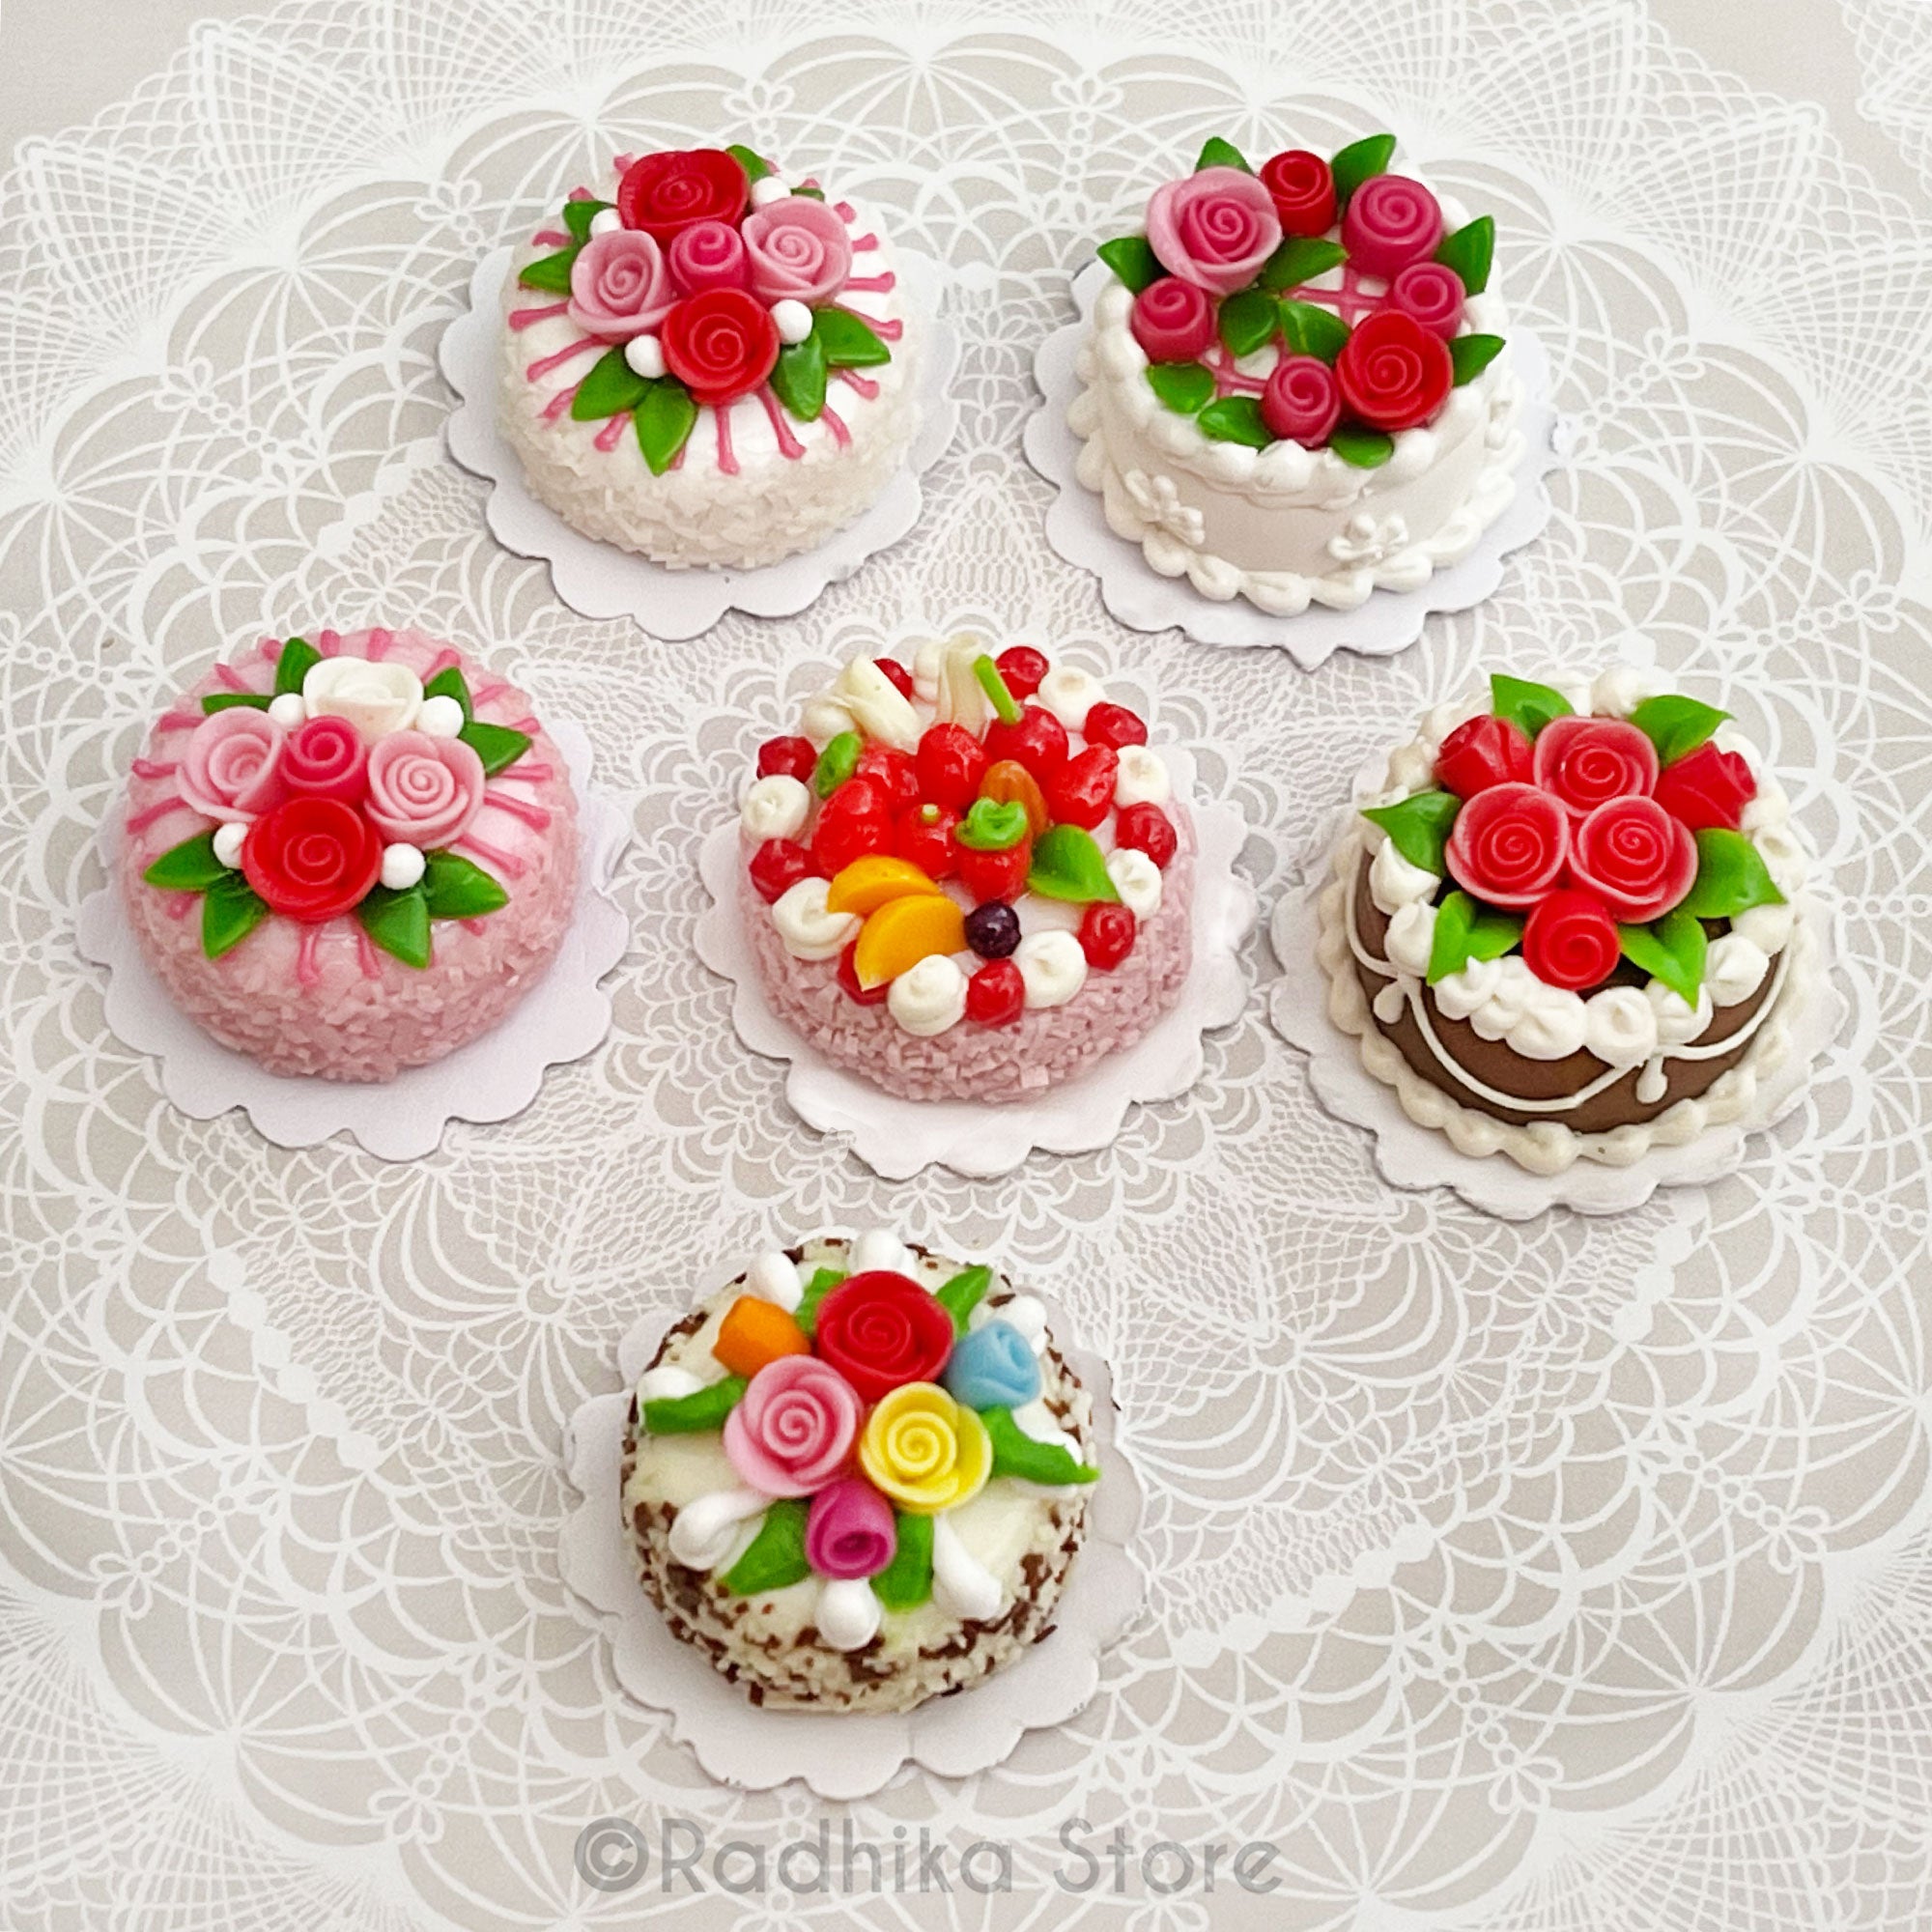 Small Round Specialty Cakes - Choose Cake